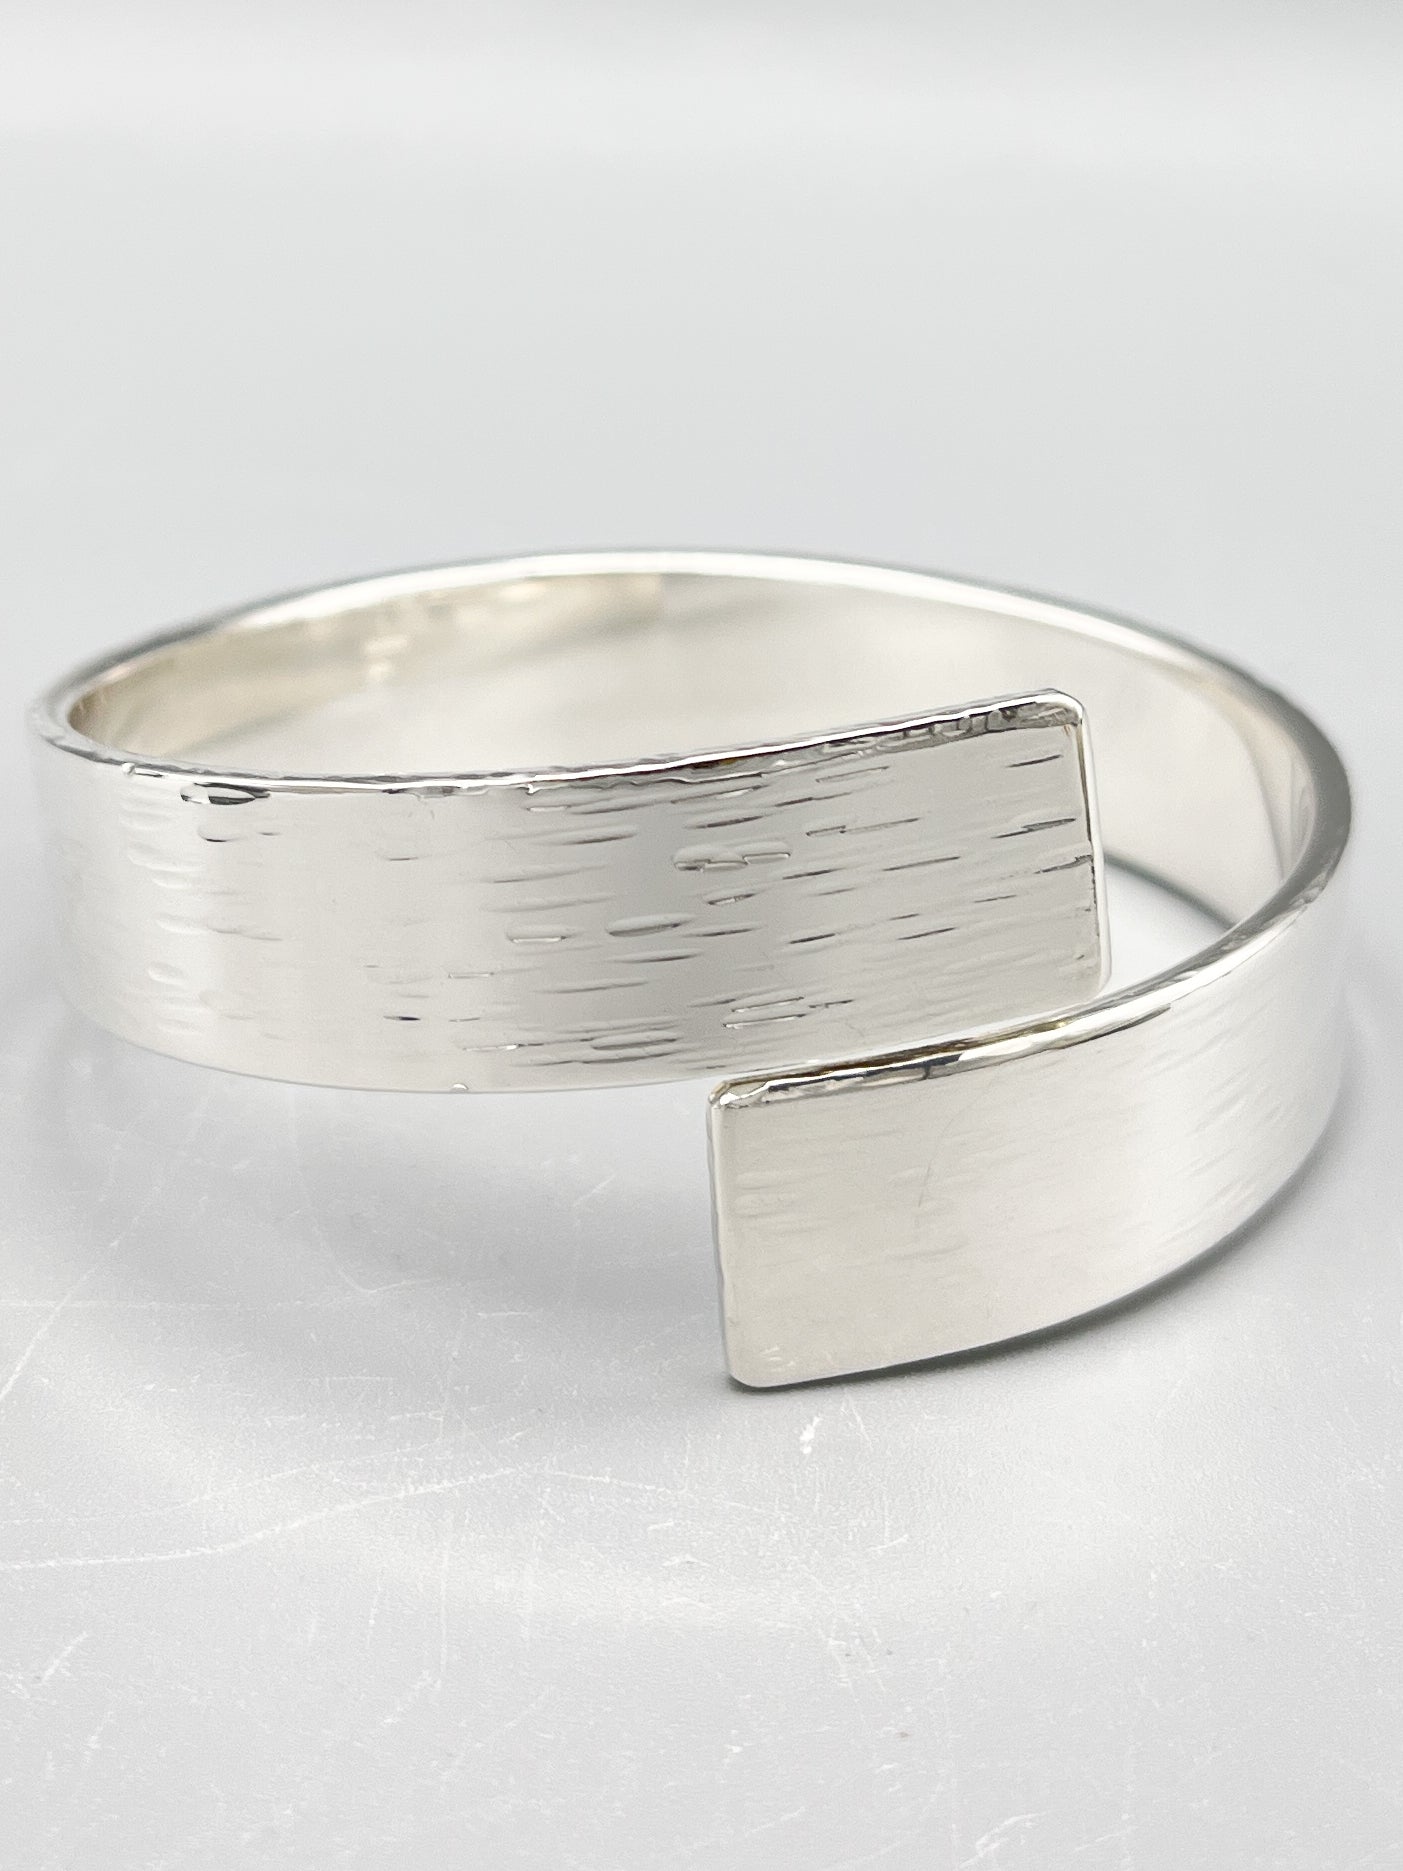 Sterling Silver Bangle, rectangular design with a 'bark' hammered finish